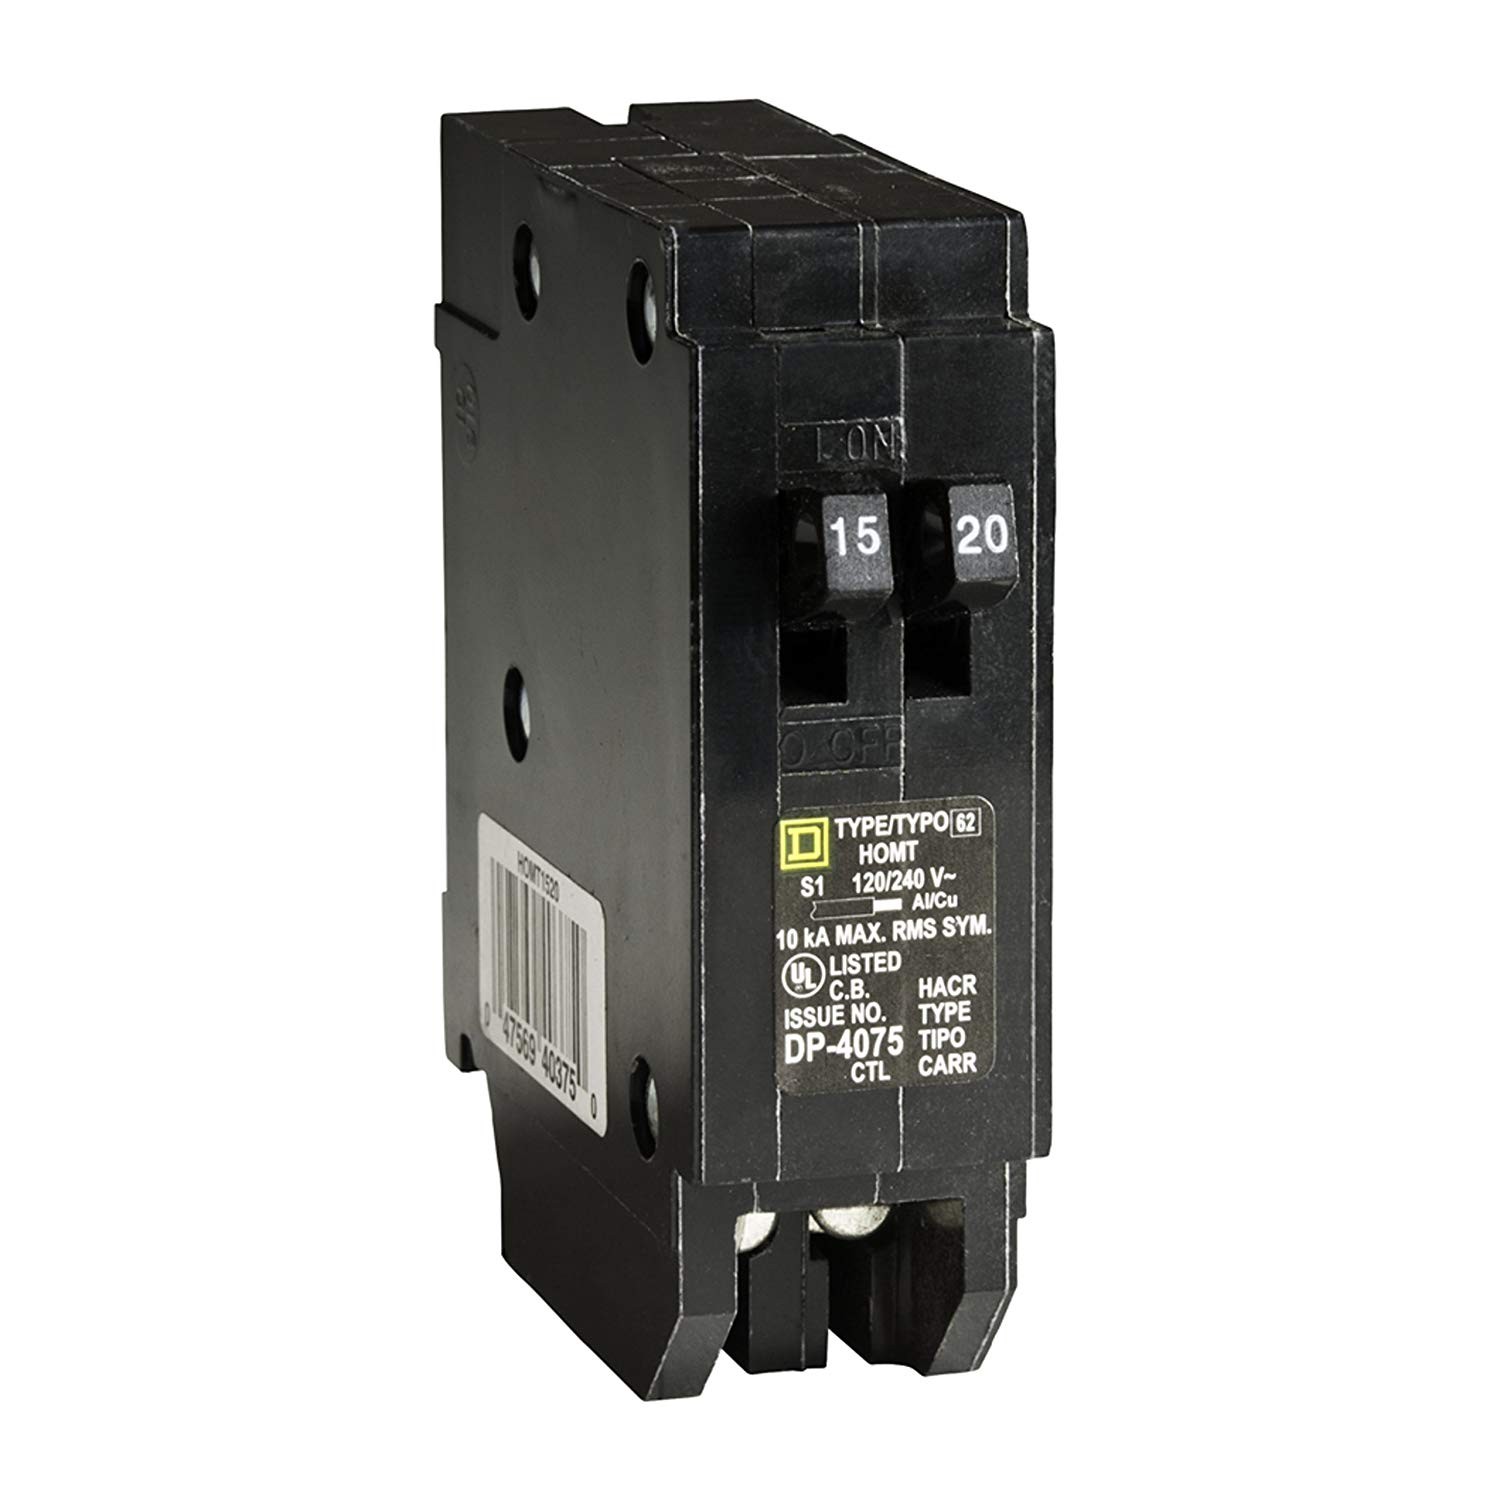 Square D Load Center Wiring Diagram Square D by Schneider Electric Homt1520cp Square D Homeline Single Of Square D Load Center Wiring Diagram